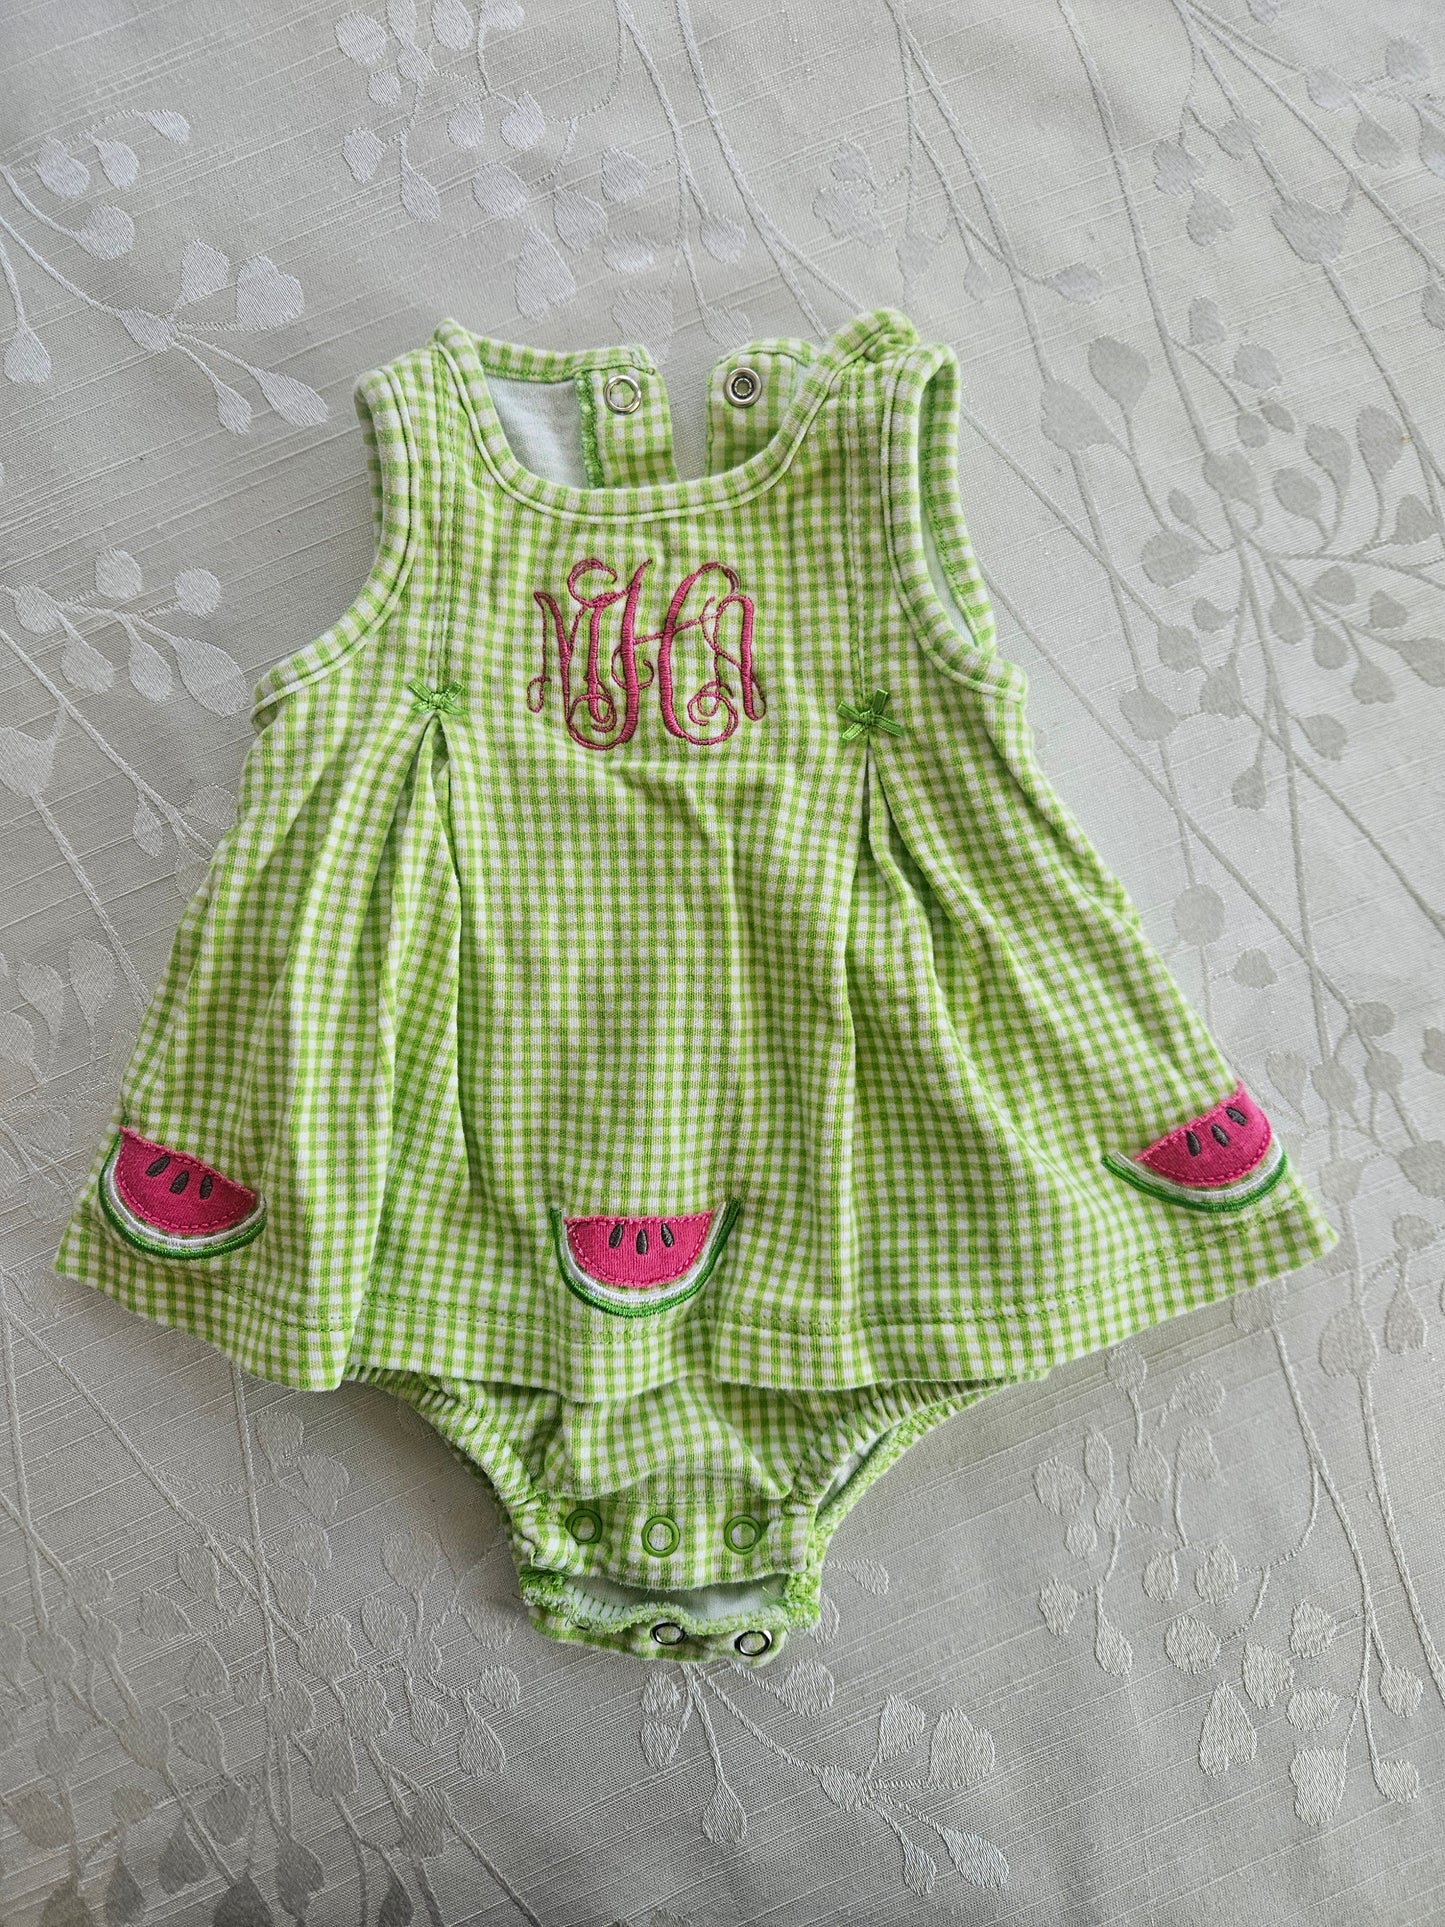 Carters Embroidered Dress - 3 months